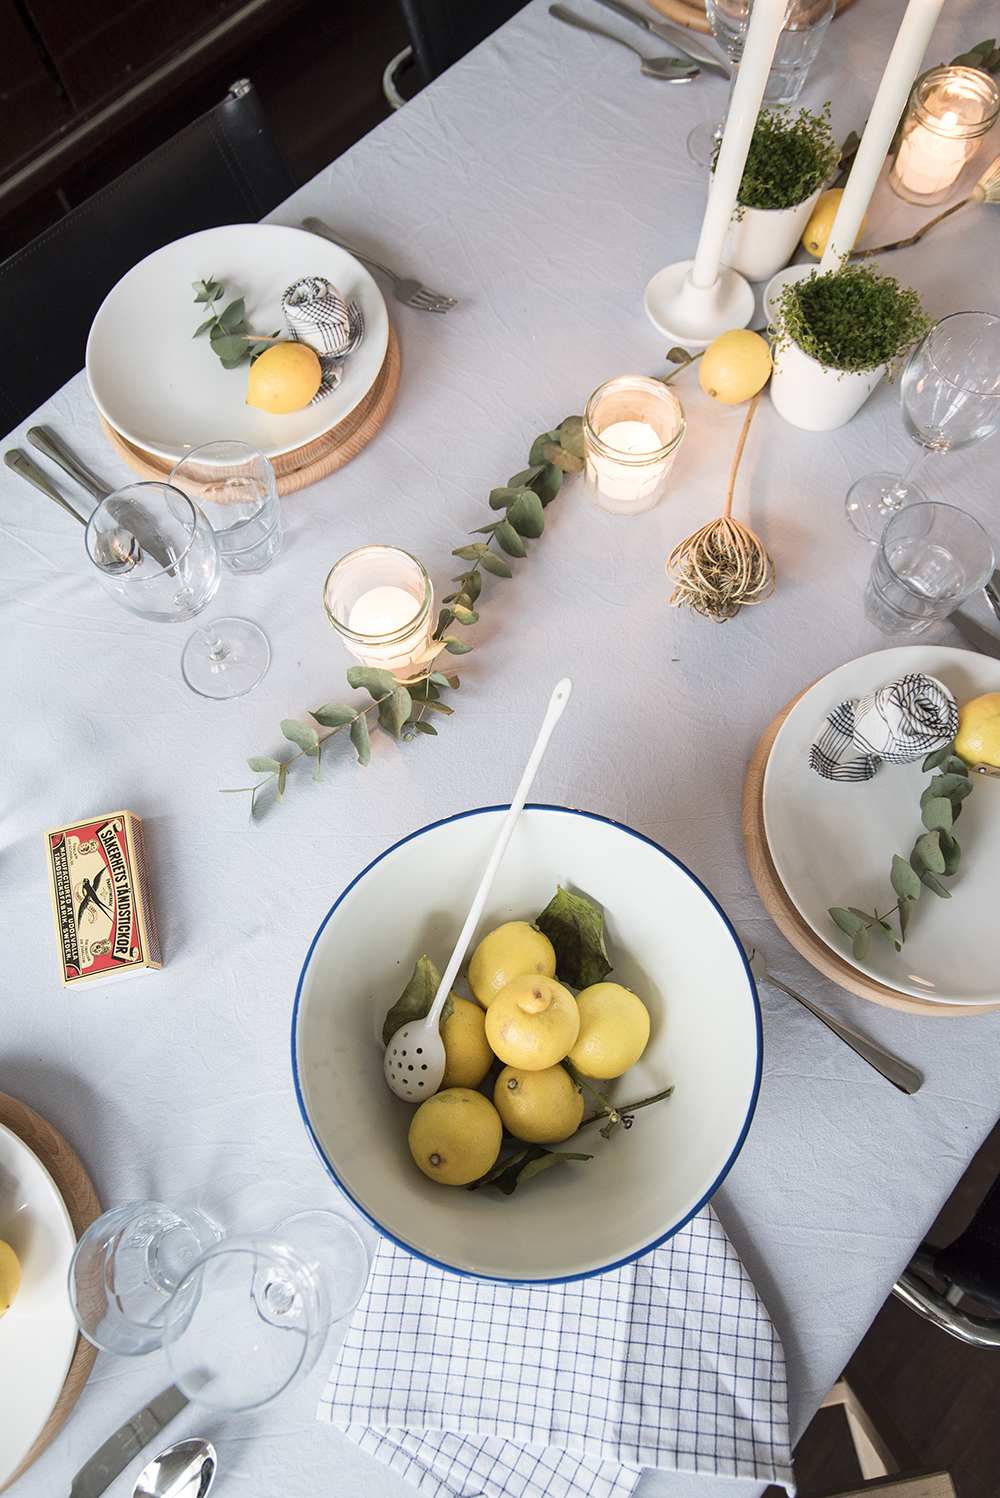 A Fresh Spring Tablescape with lemons // No Glitter No Glory // #dillekamille